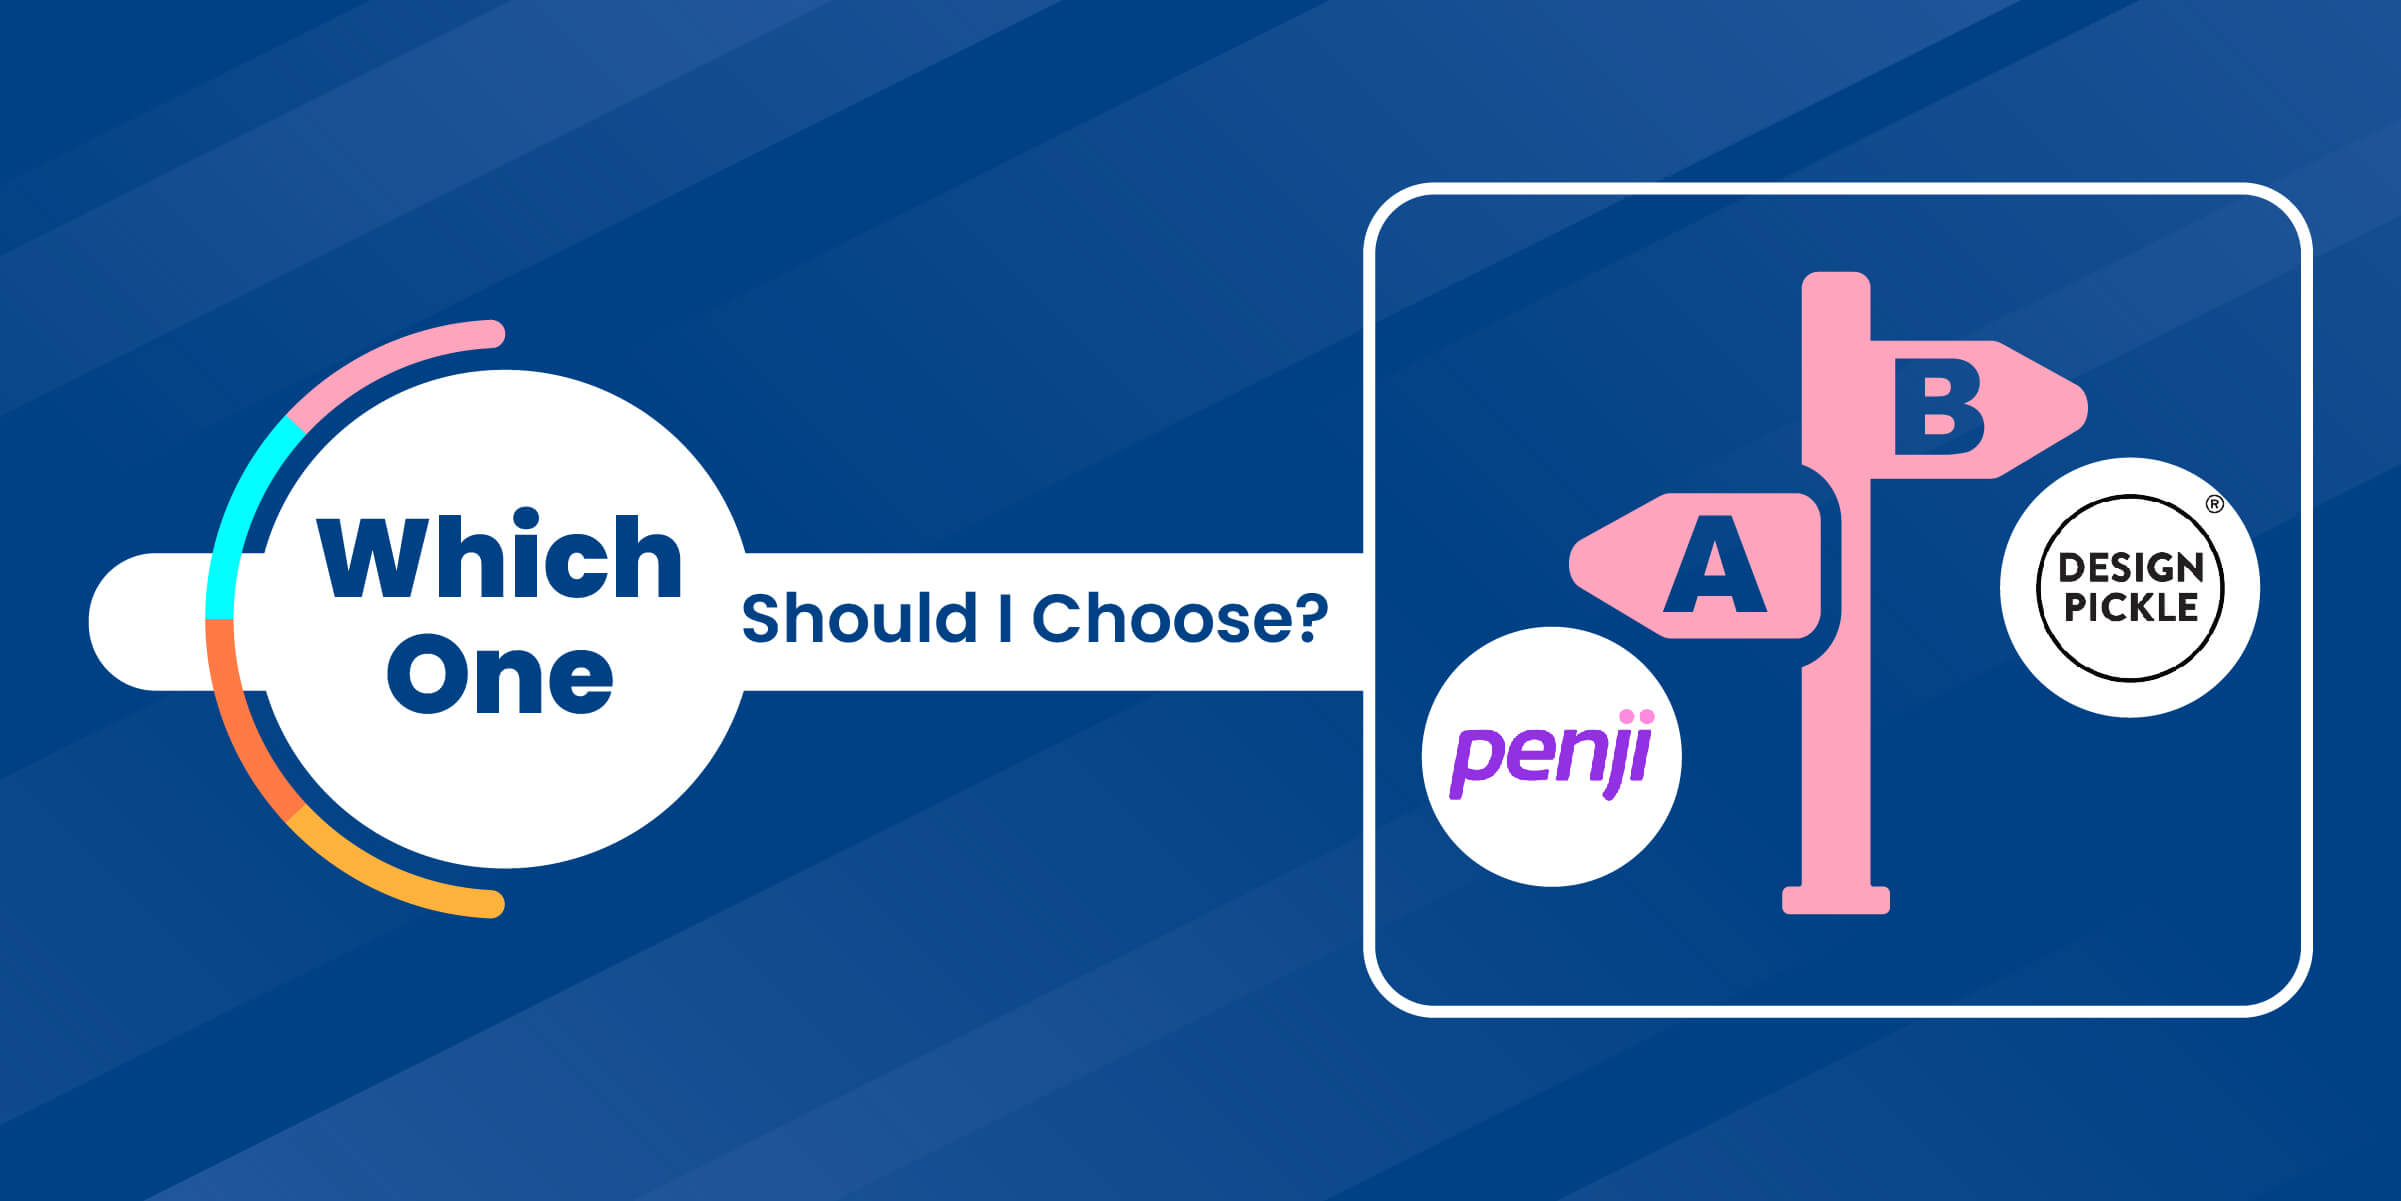 Which One Should I Choose Design Pickle or Penji